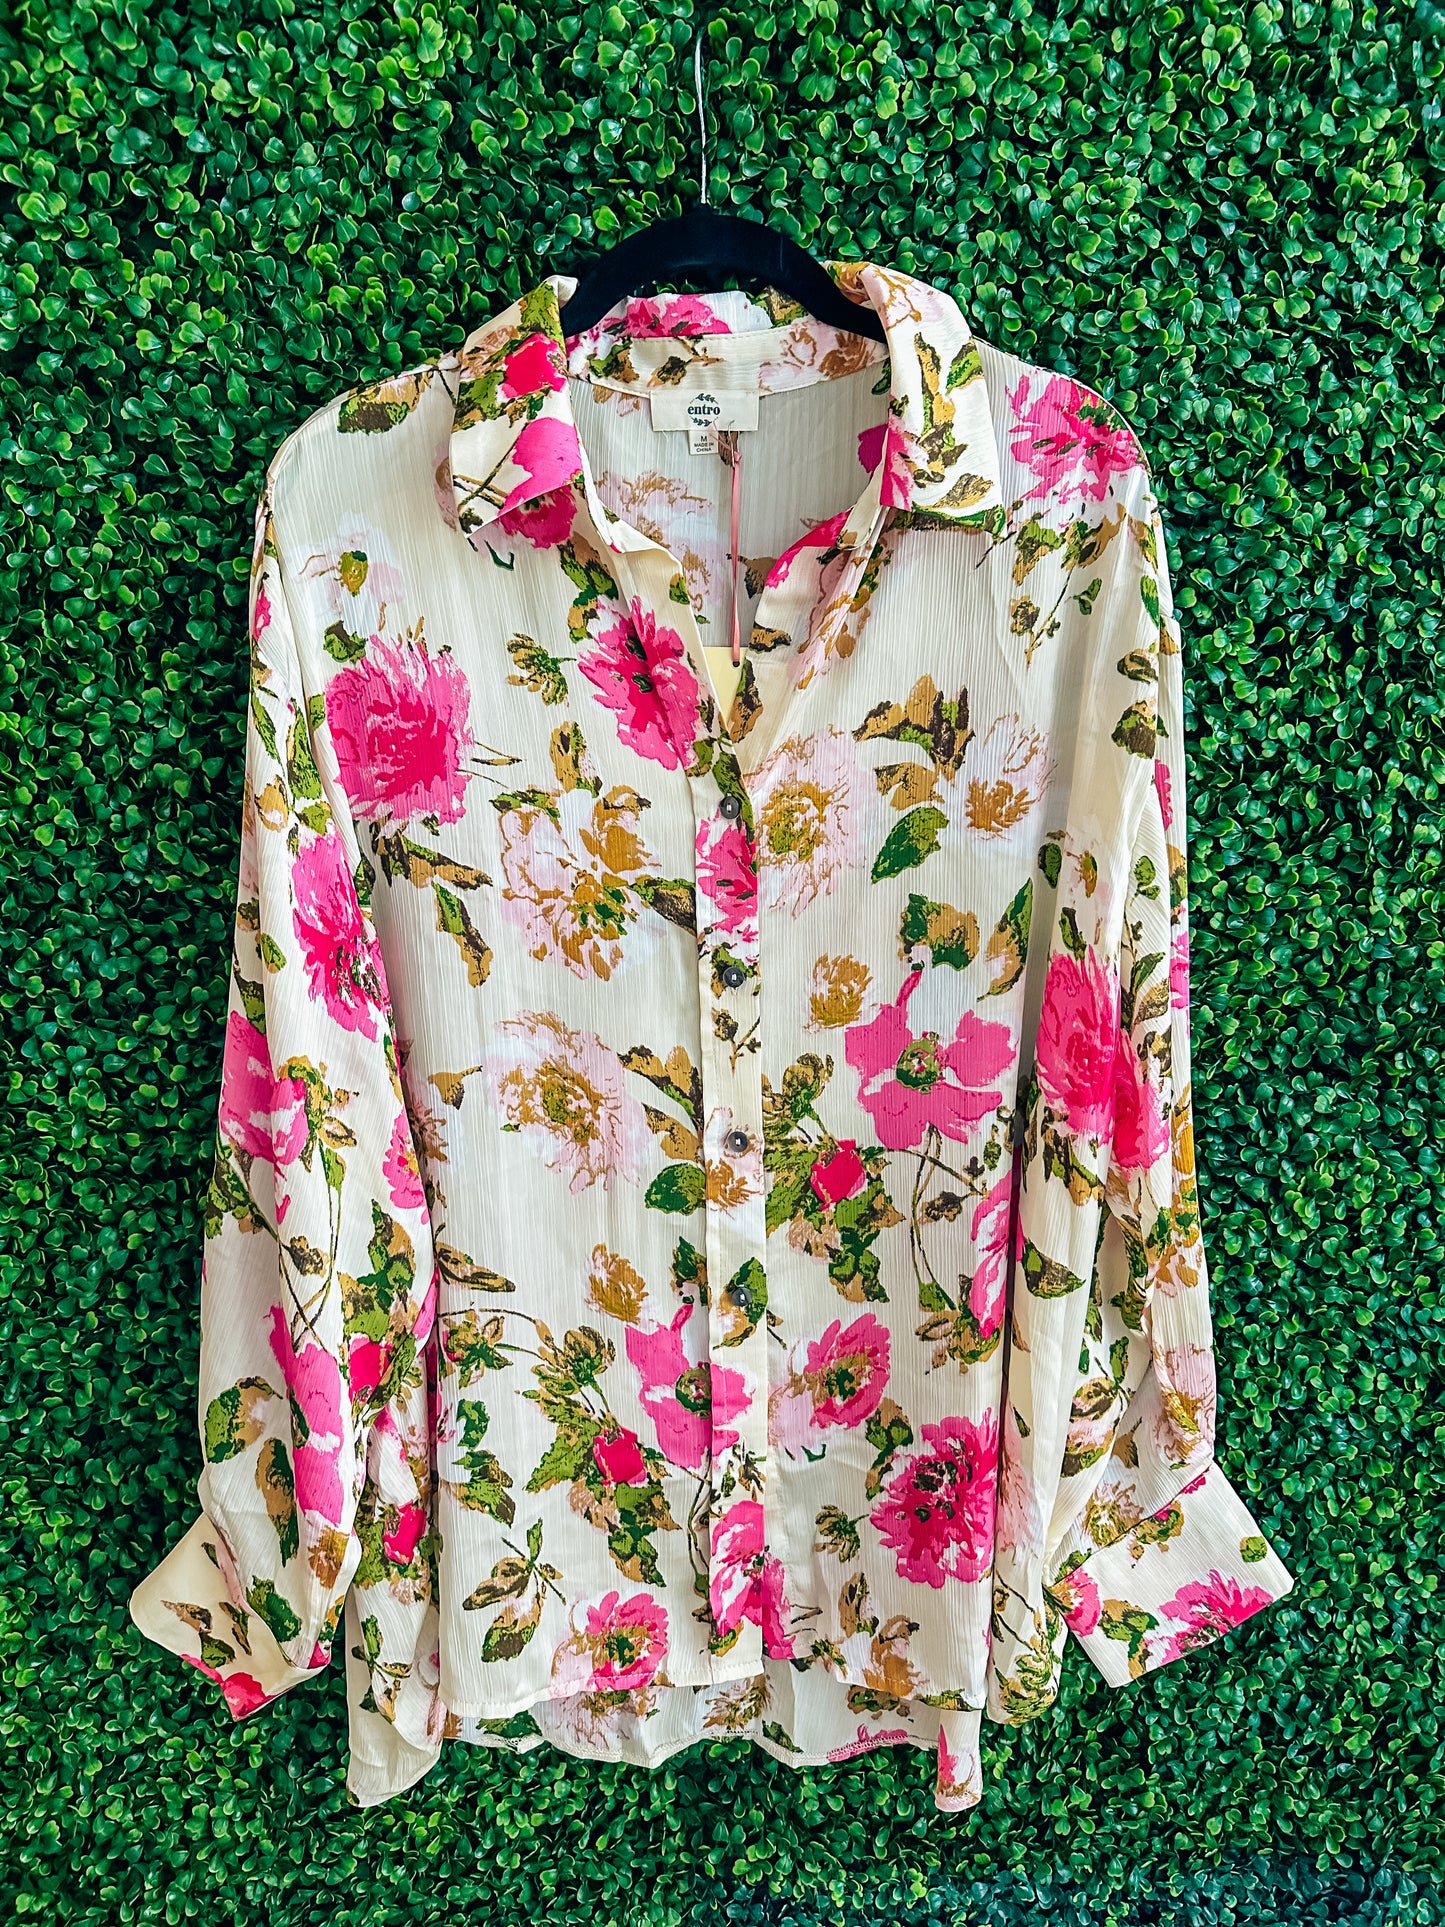 "May Flowers" Blouse